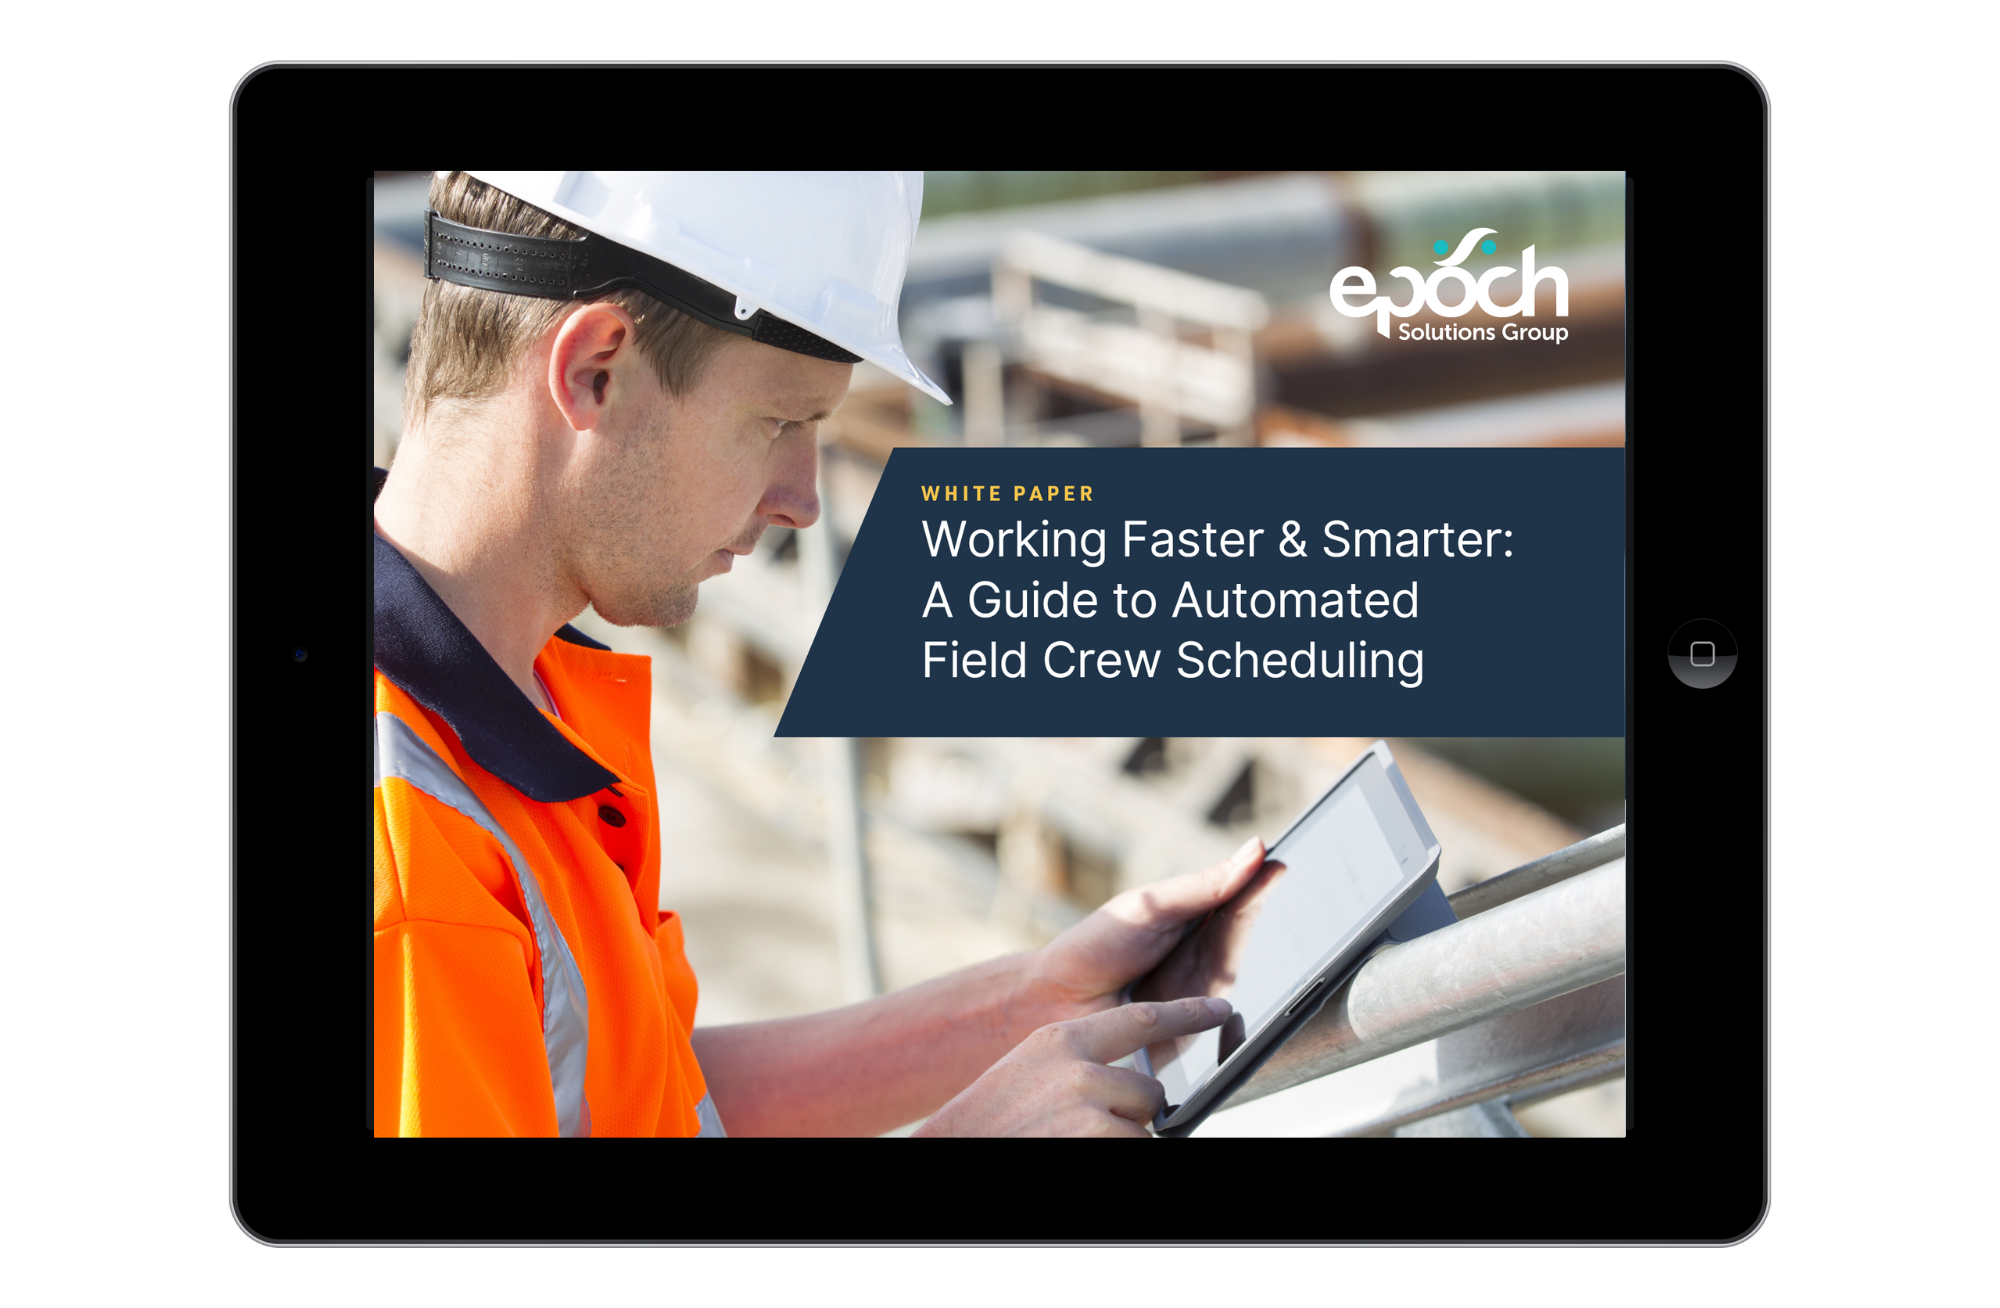 Working Faster & Smarter: A Guide to Automated Field Crew Scheduling